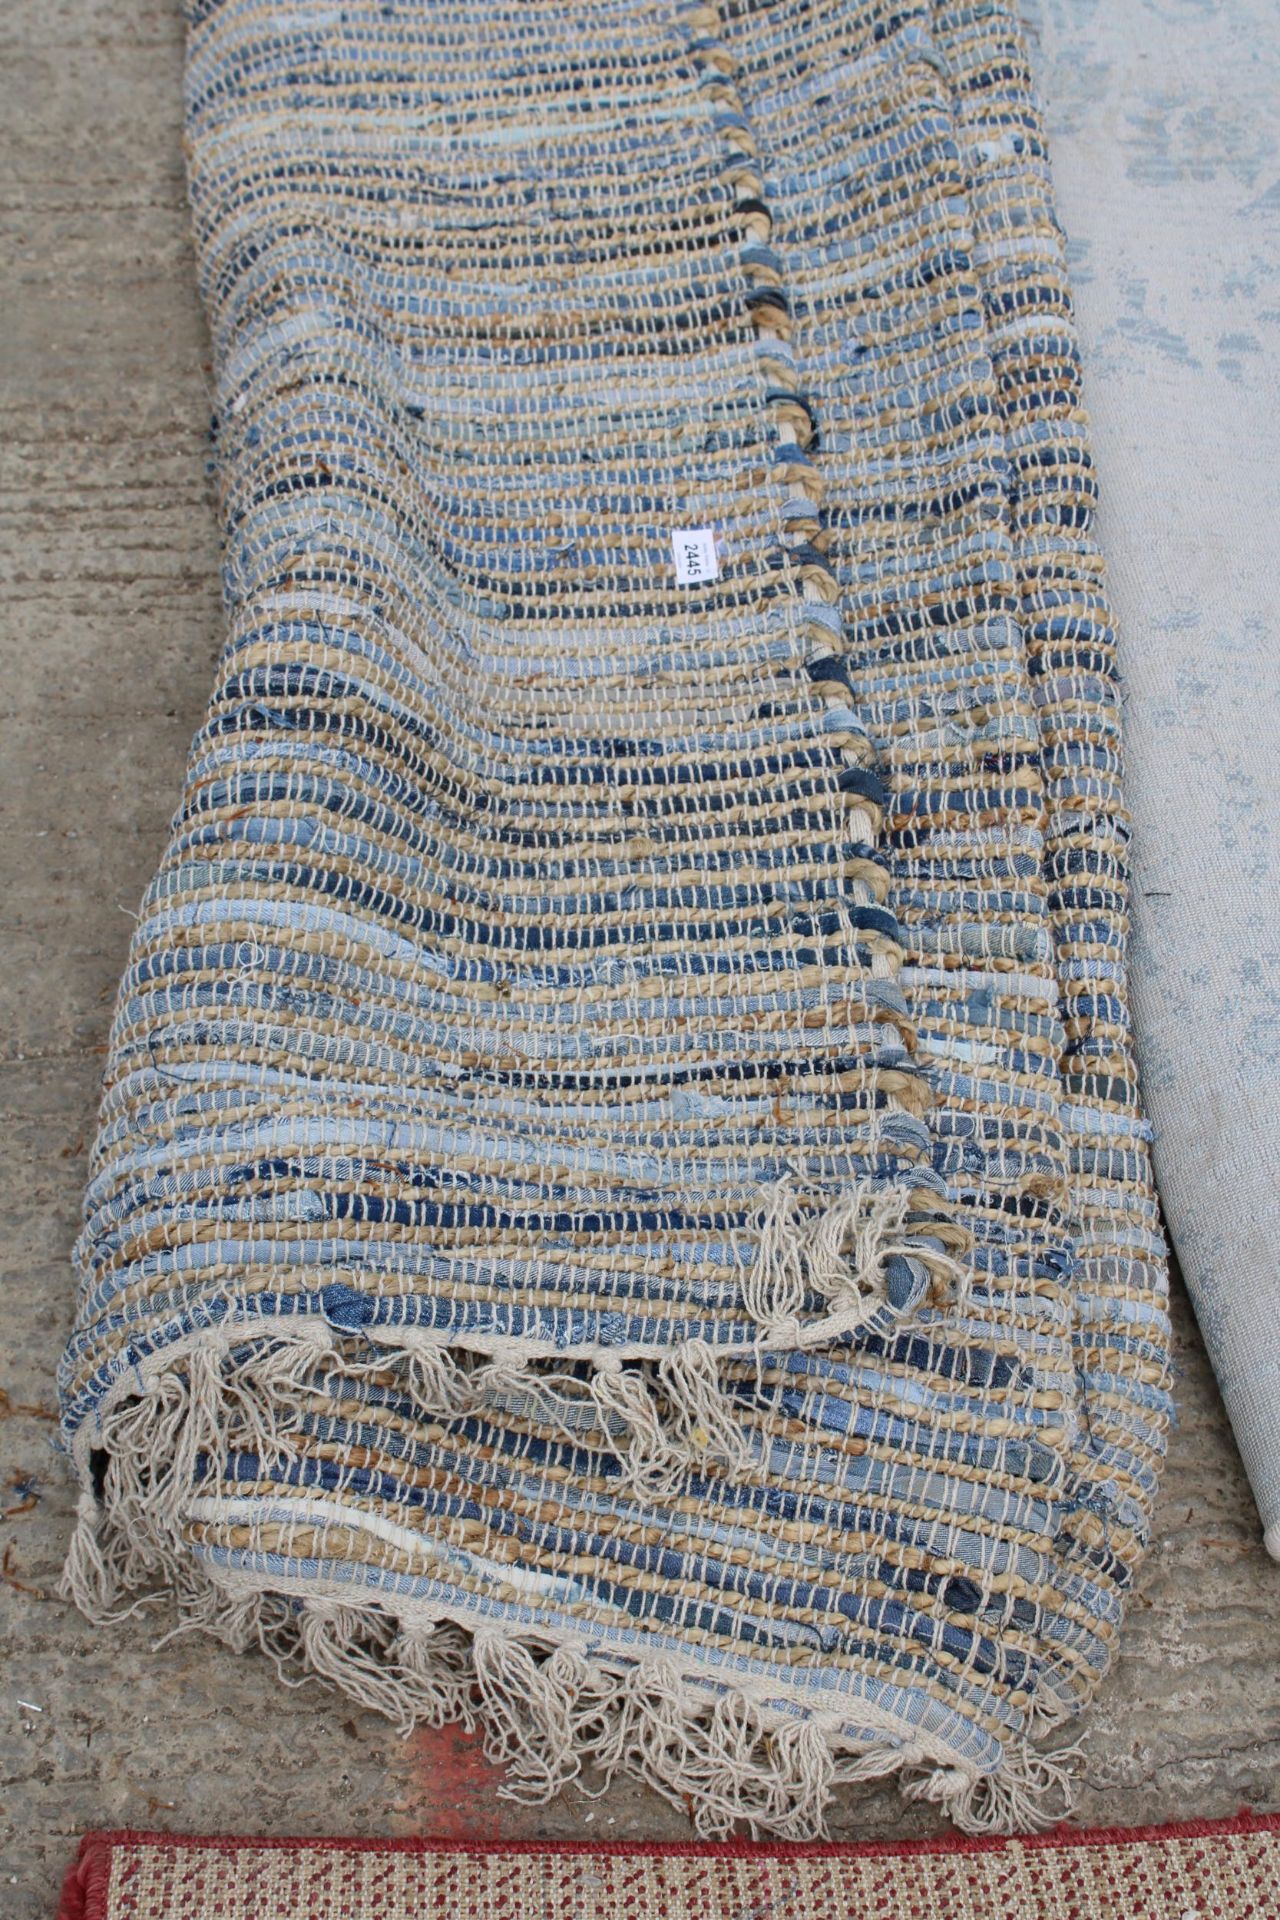 A BELIEVED AS NEW MADE IN INDIA HAND WOVEN NATURAL DENIM RUG (275CM x365CM) - Image 3 of 4